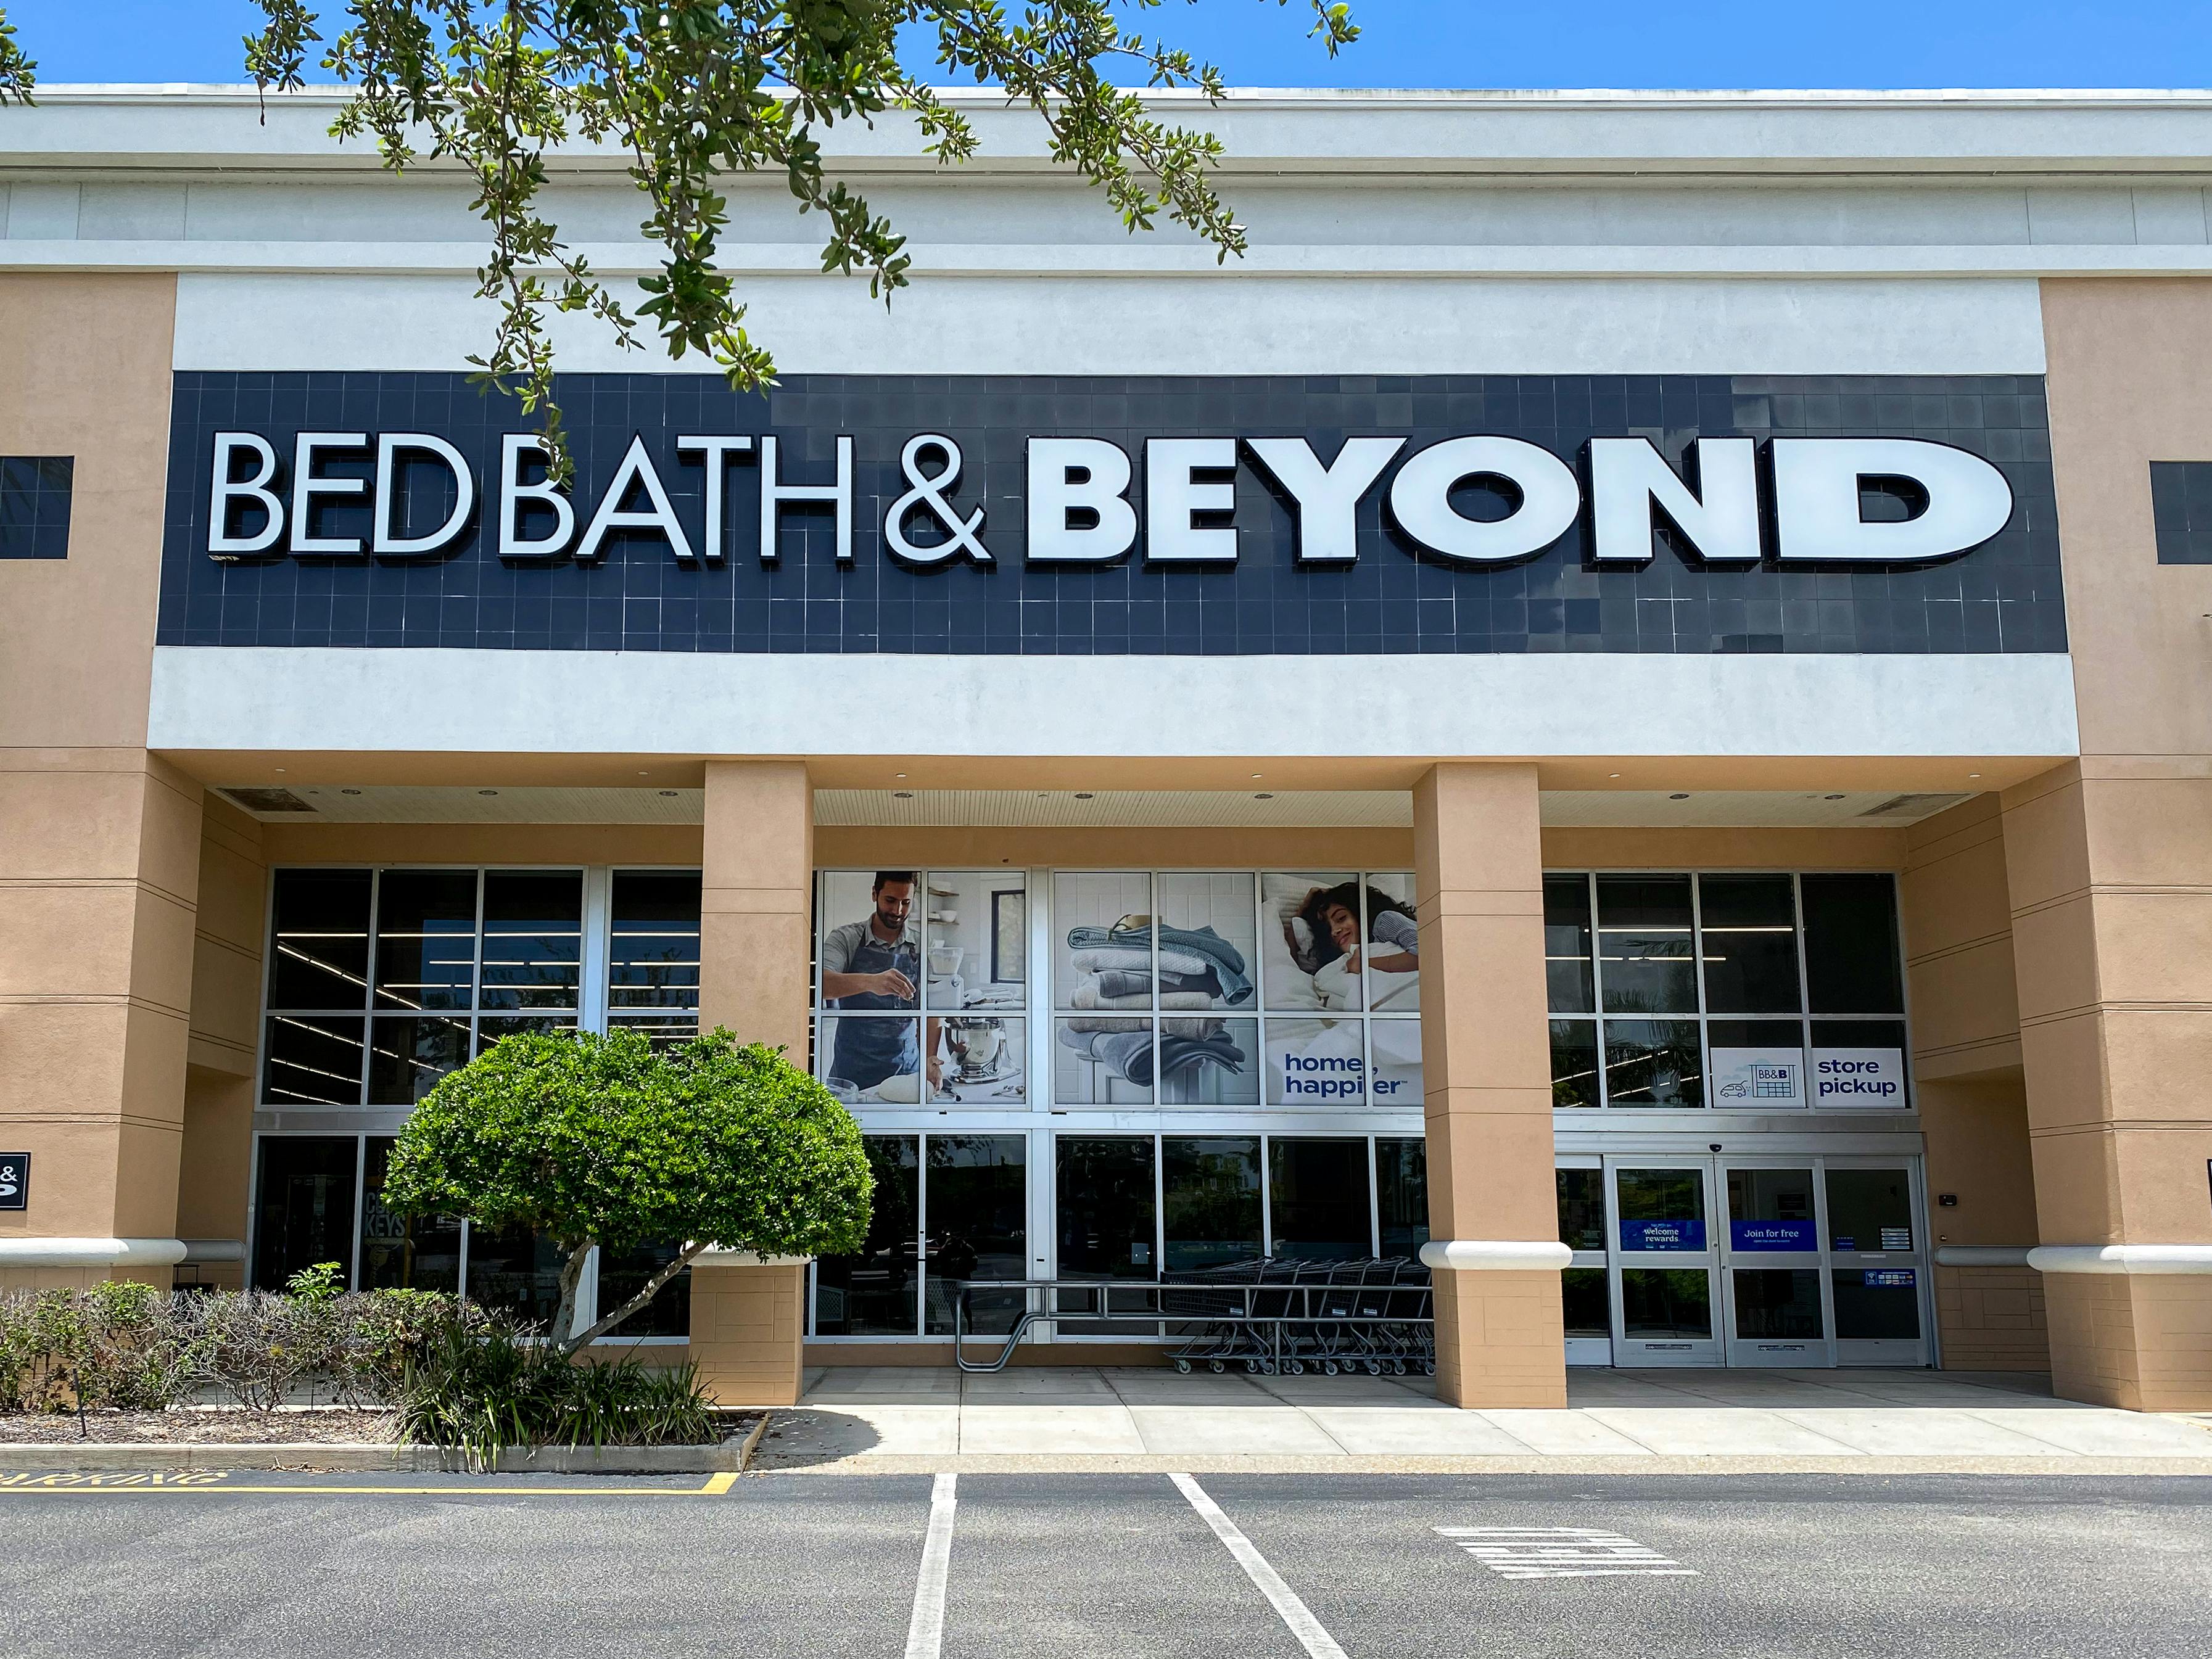 A Bed Bath & Beyond storefront.